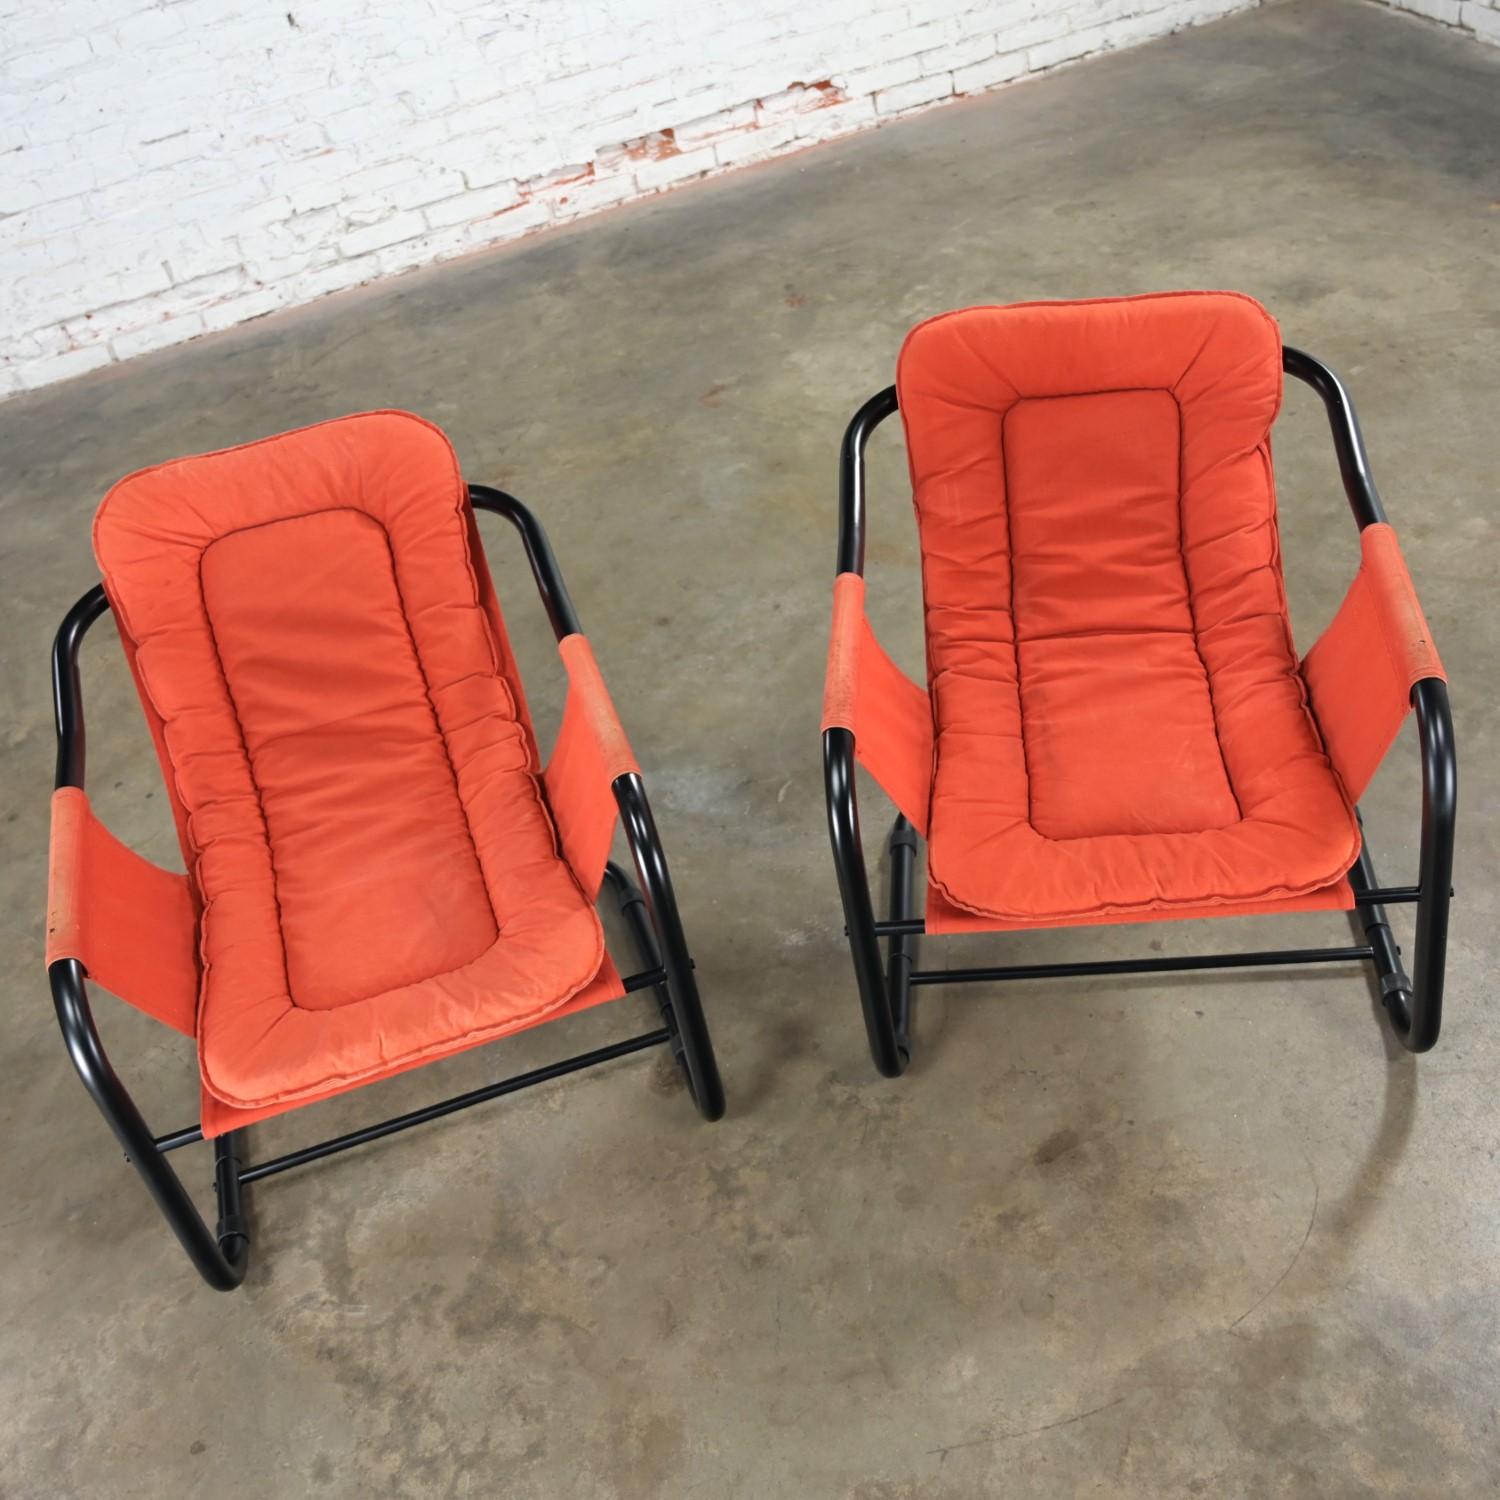 Metal 1970’s Modern Orange & Black Tube Cantilever Sling Lounge Chairs Jerry Johnson S For Sale